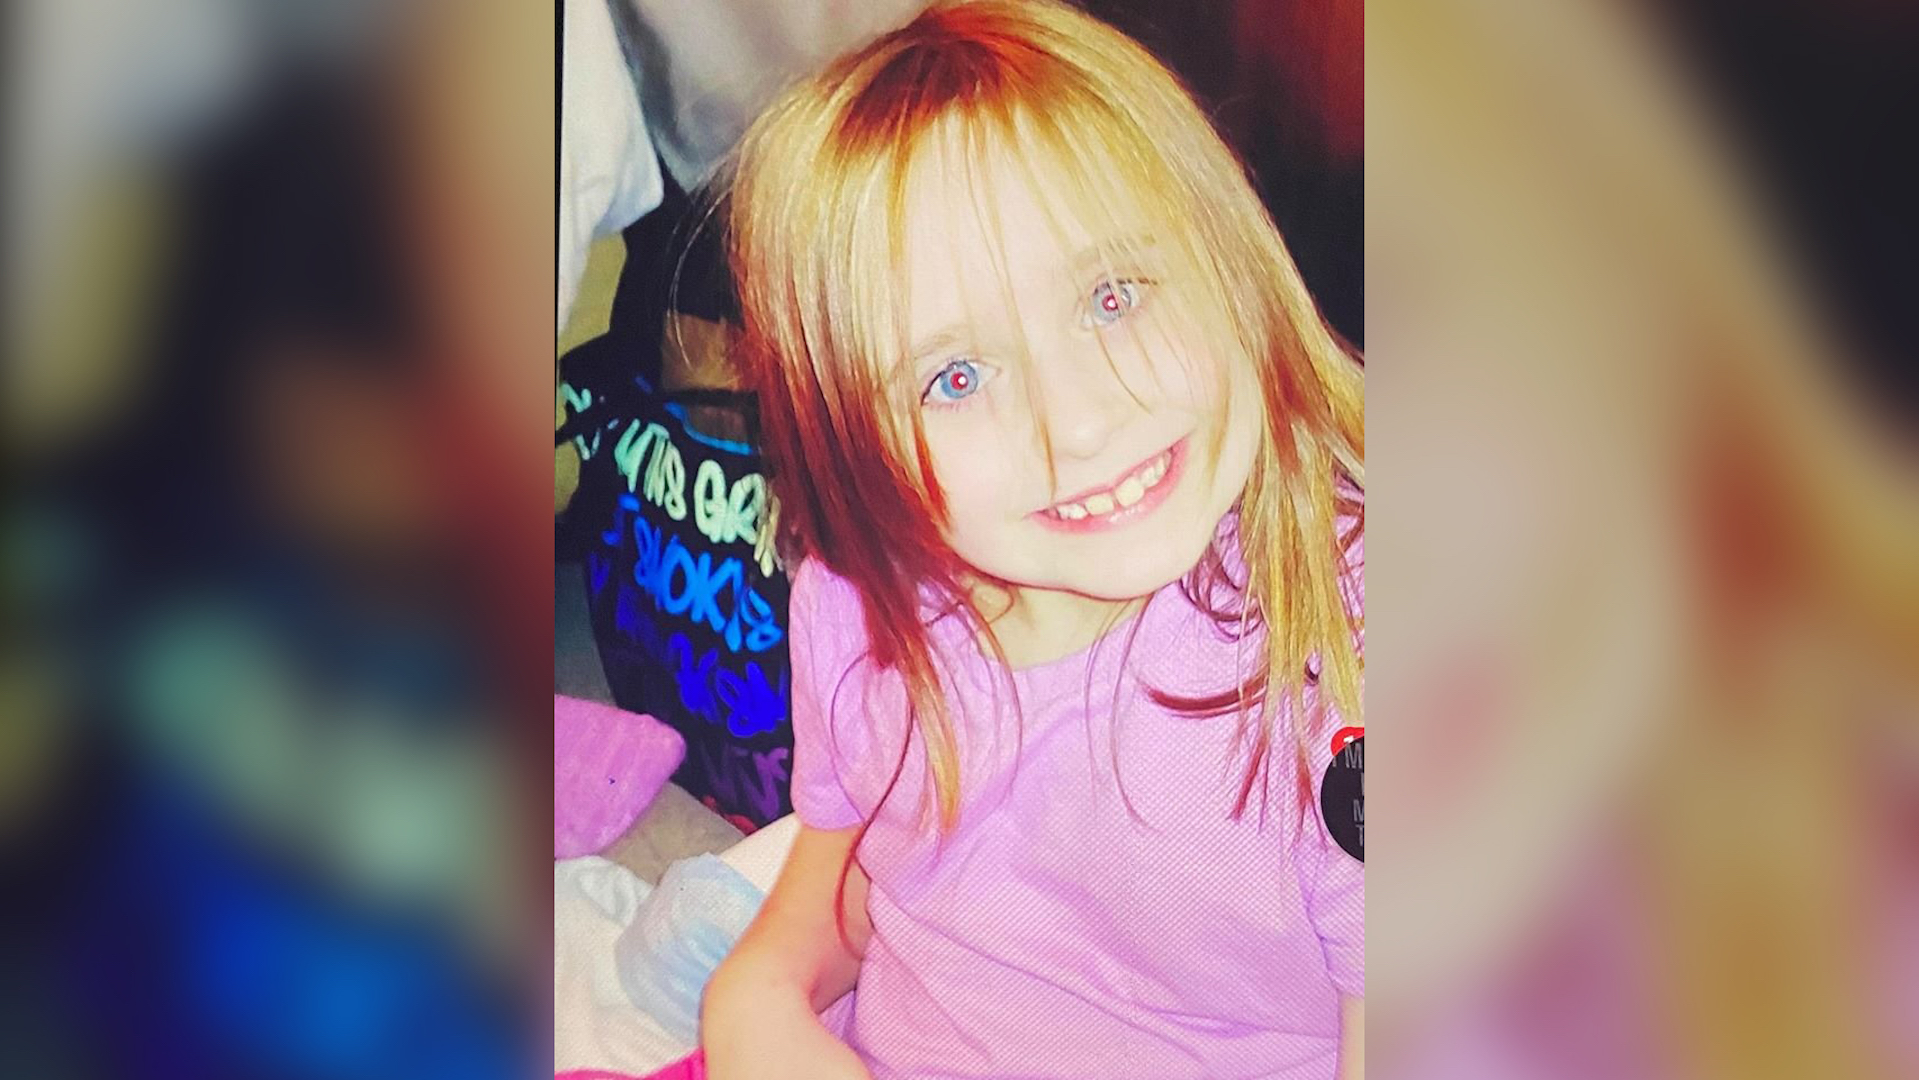 Police ‘link’ The Death Of 6 Year Old Faye Swetlik To A Neighbor Found Dead In His Home